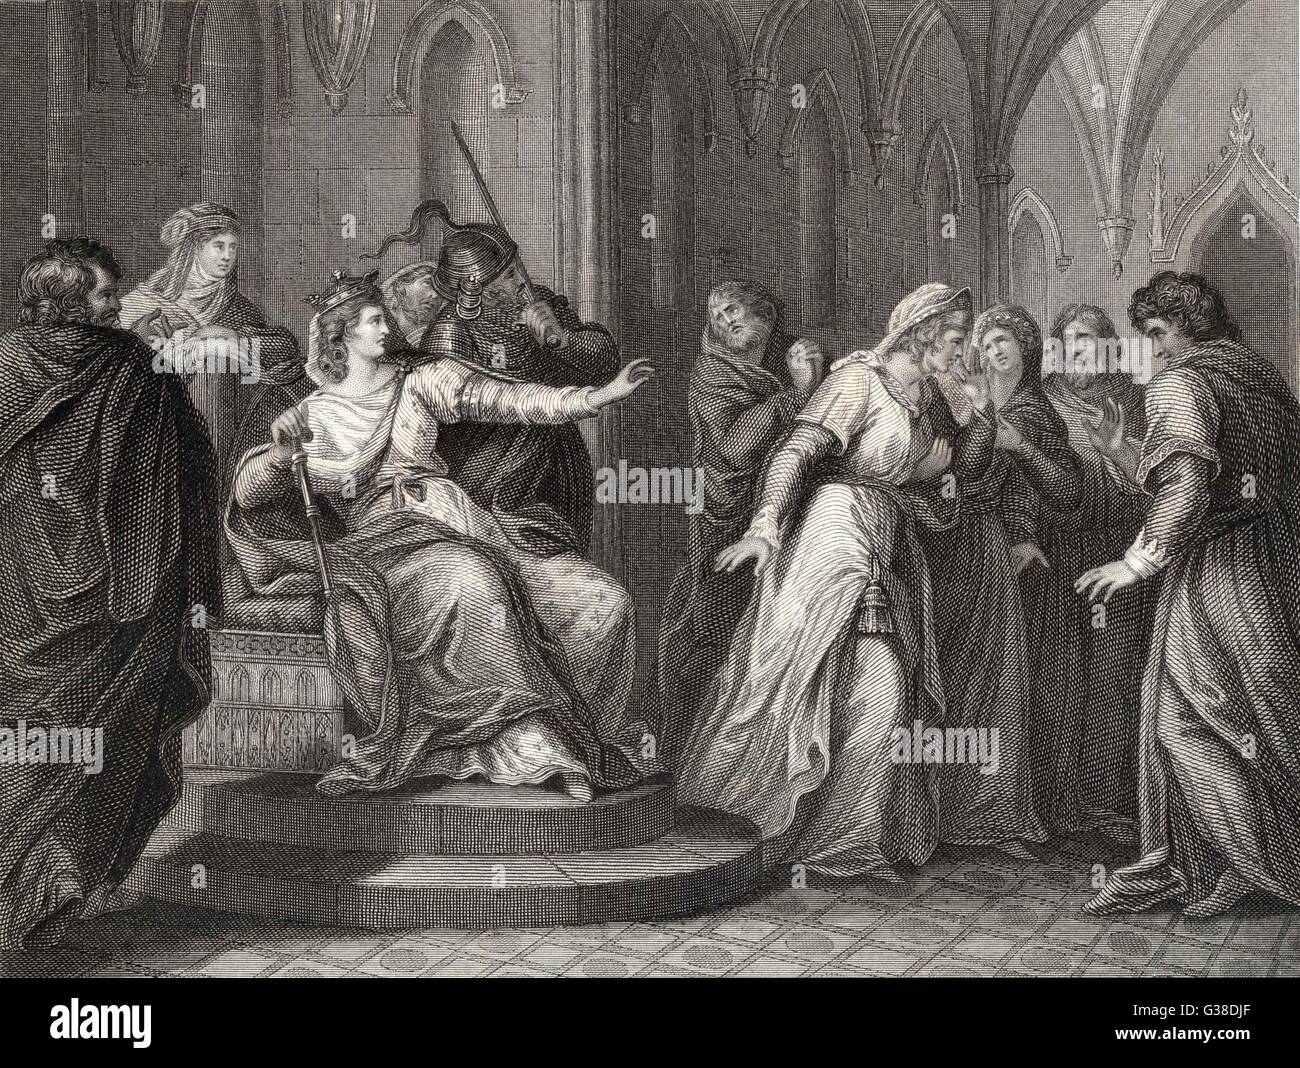 The Empress Matilda, daughter  of Henry I, refuses the plea  of King Stephen's wife,  Matilda, to release him       Date: 1141 Stock Photo